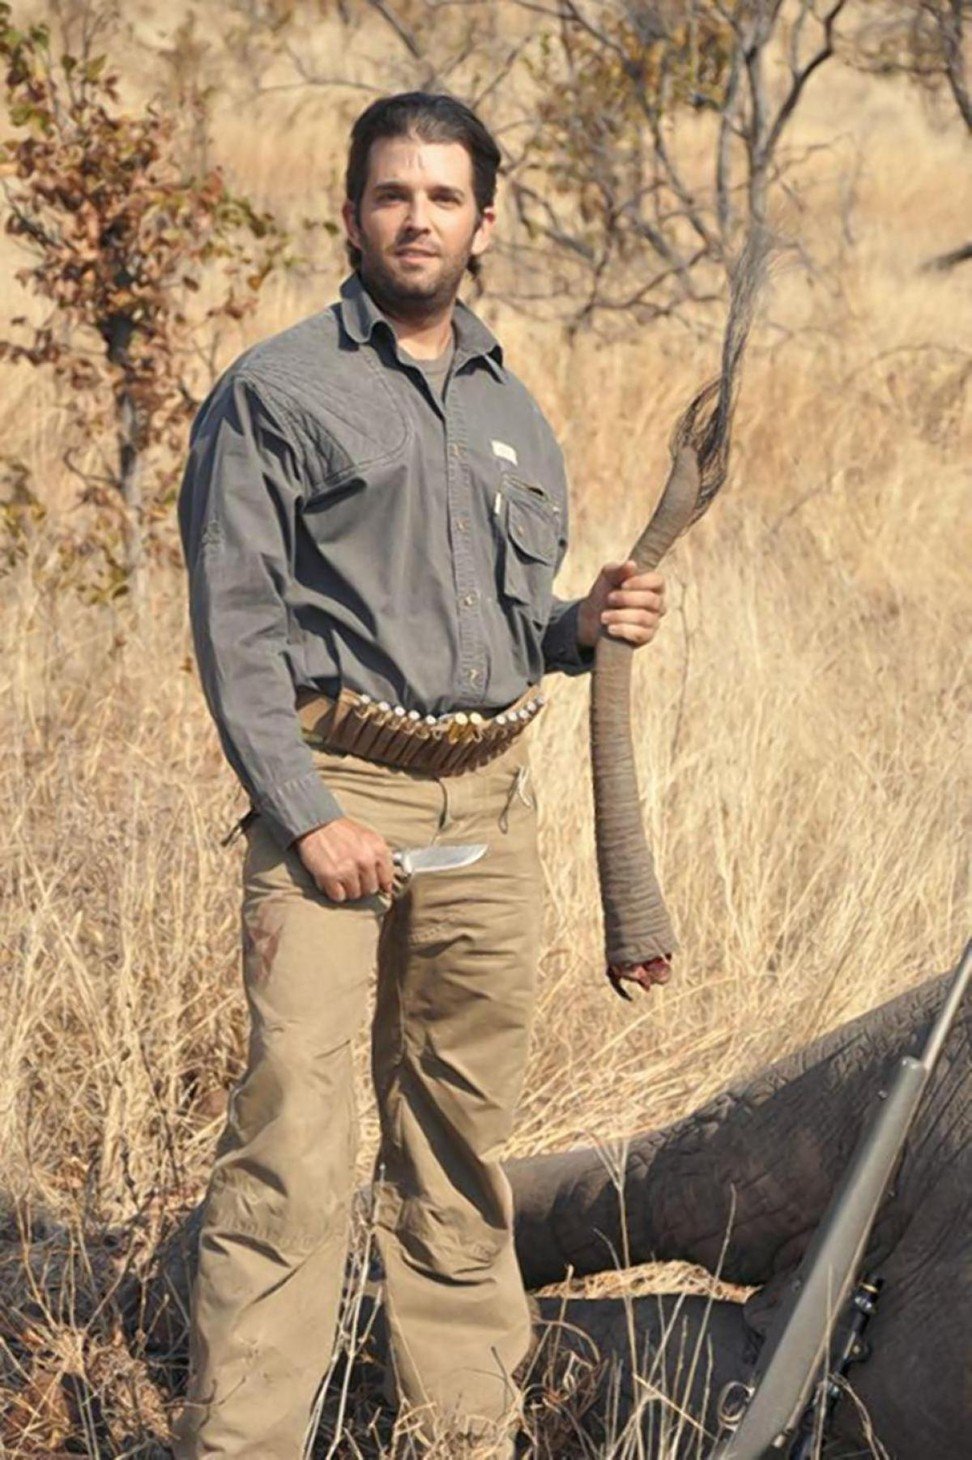 Donald Trump Jr. is seen with the tail of an elephant he killed during the 2011 hunting trip. Photo: Hunting Legends